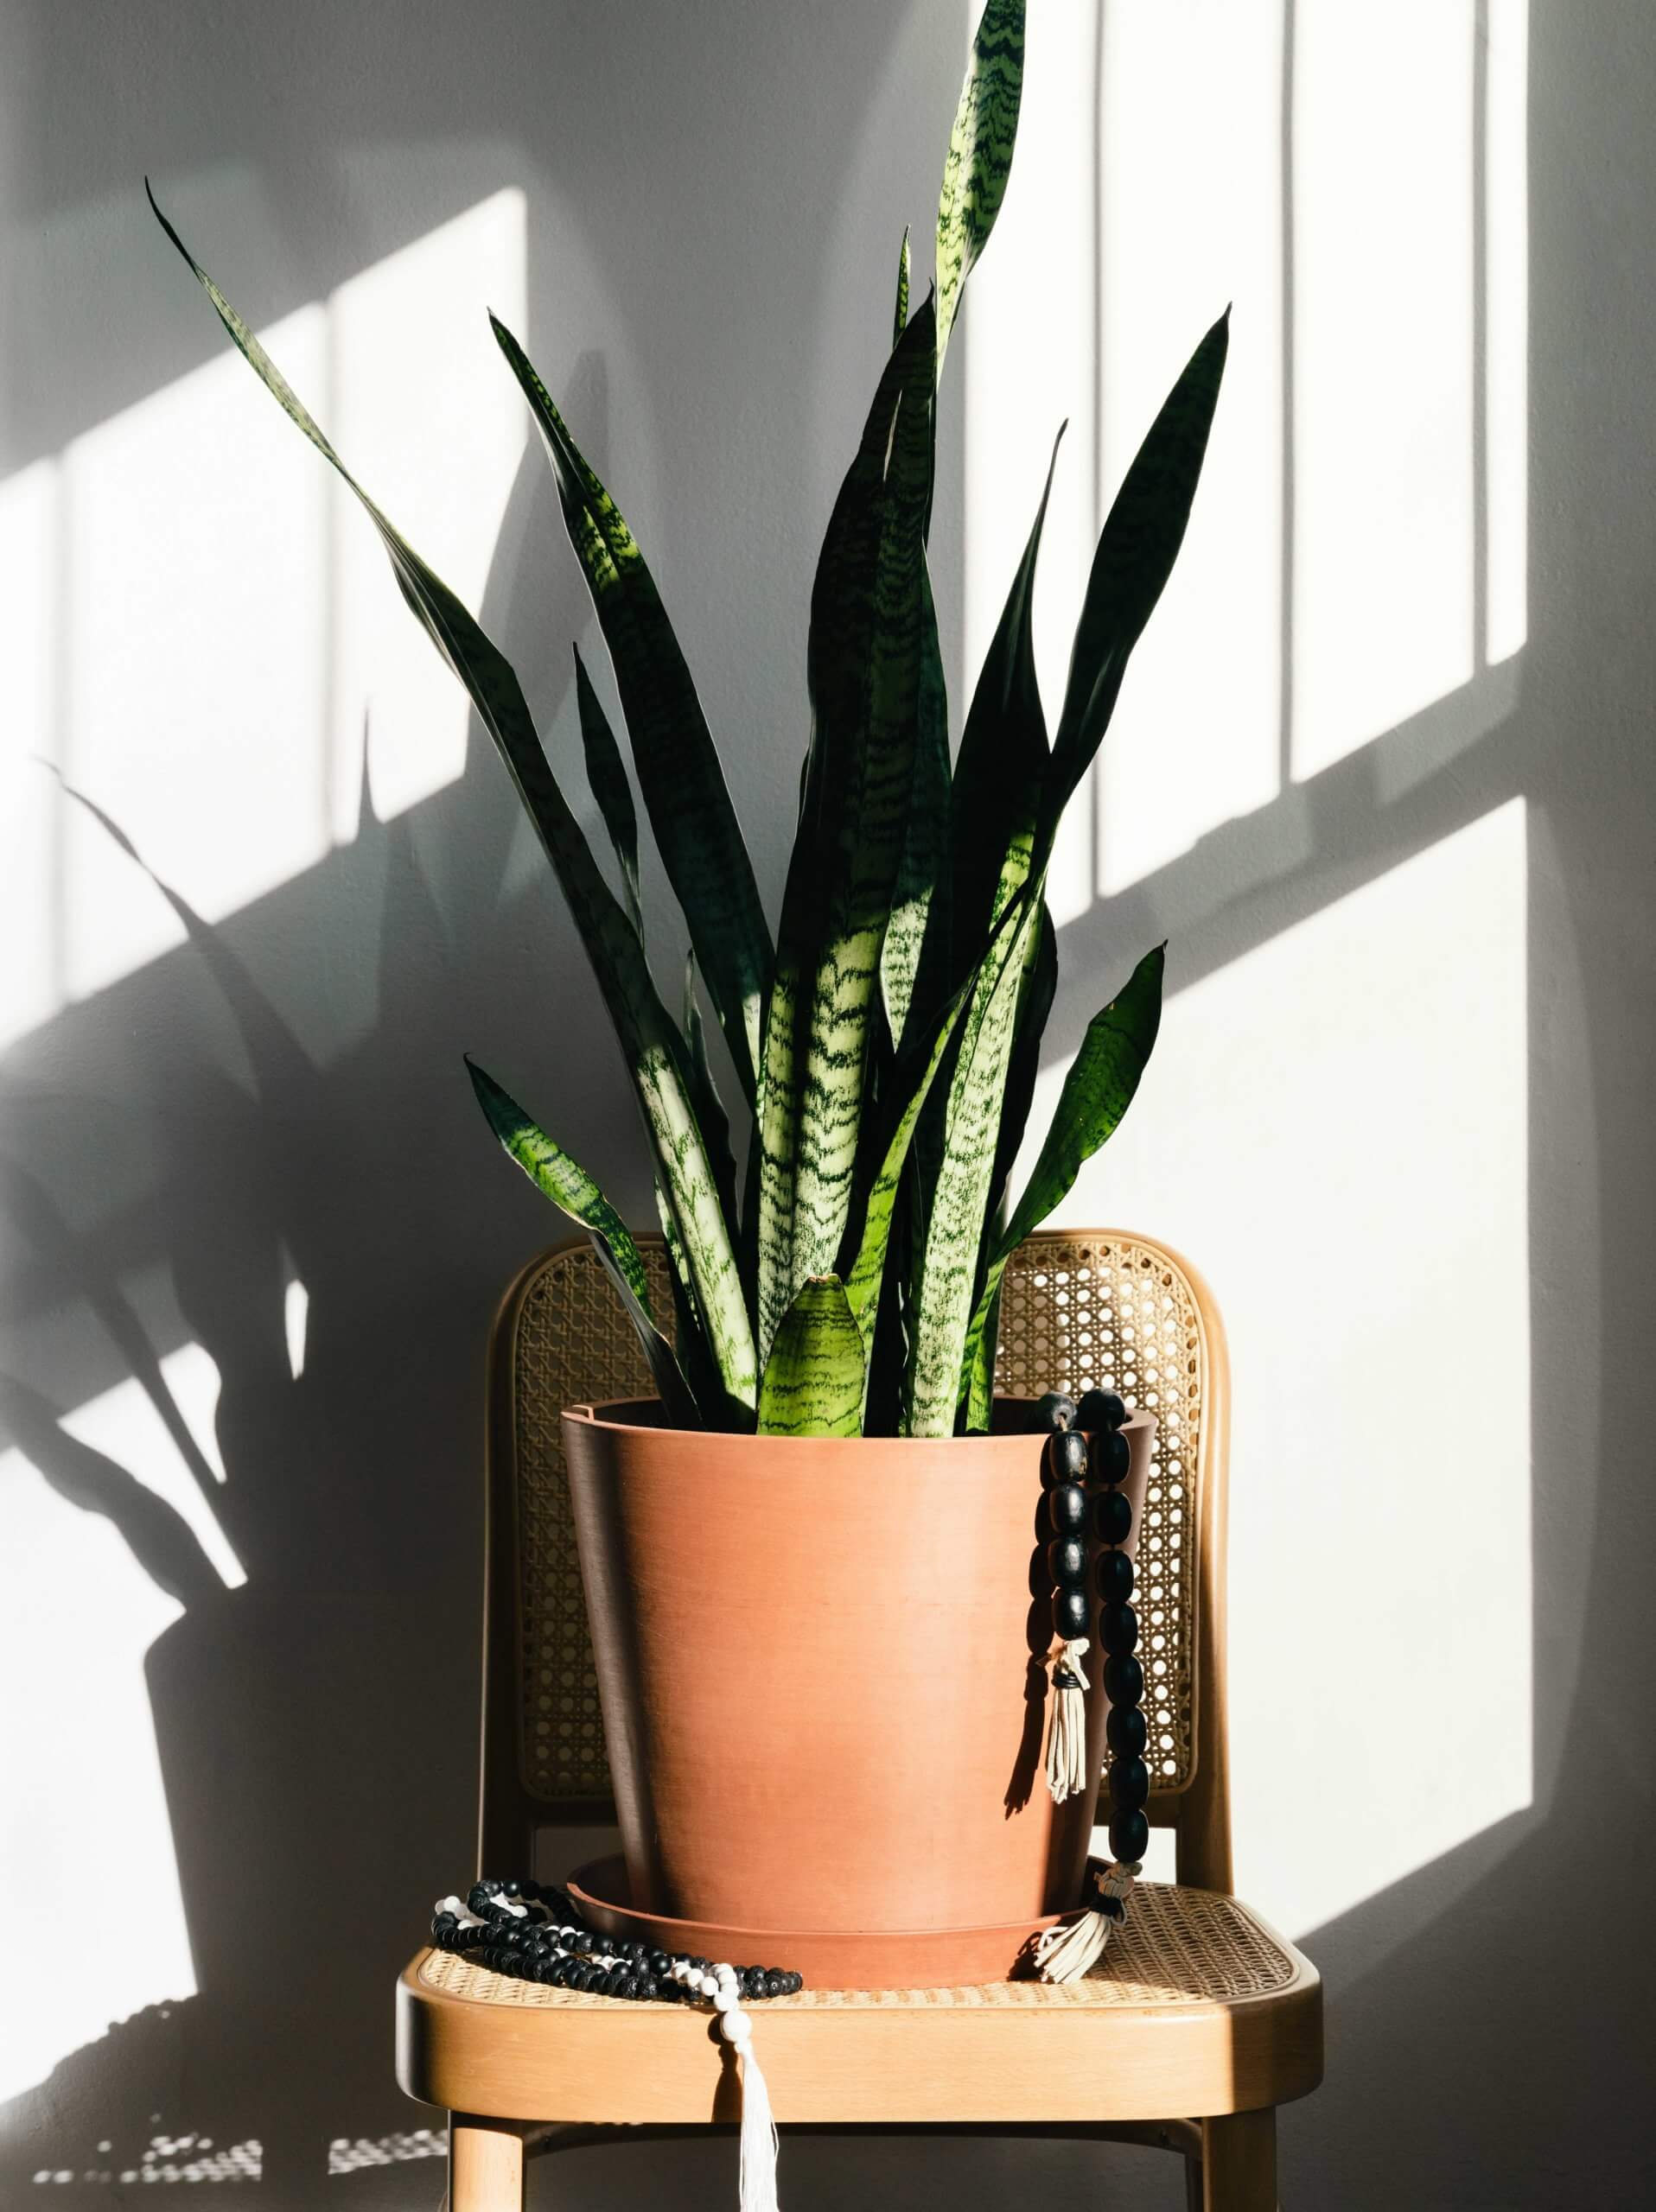 A large sansevieria sits in the sunlight atop a wicker chair against a white wall.